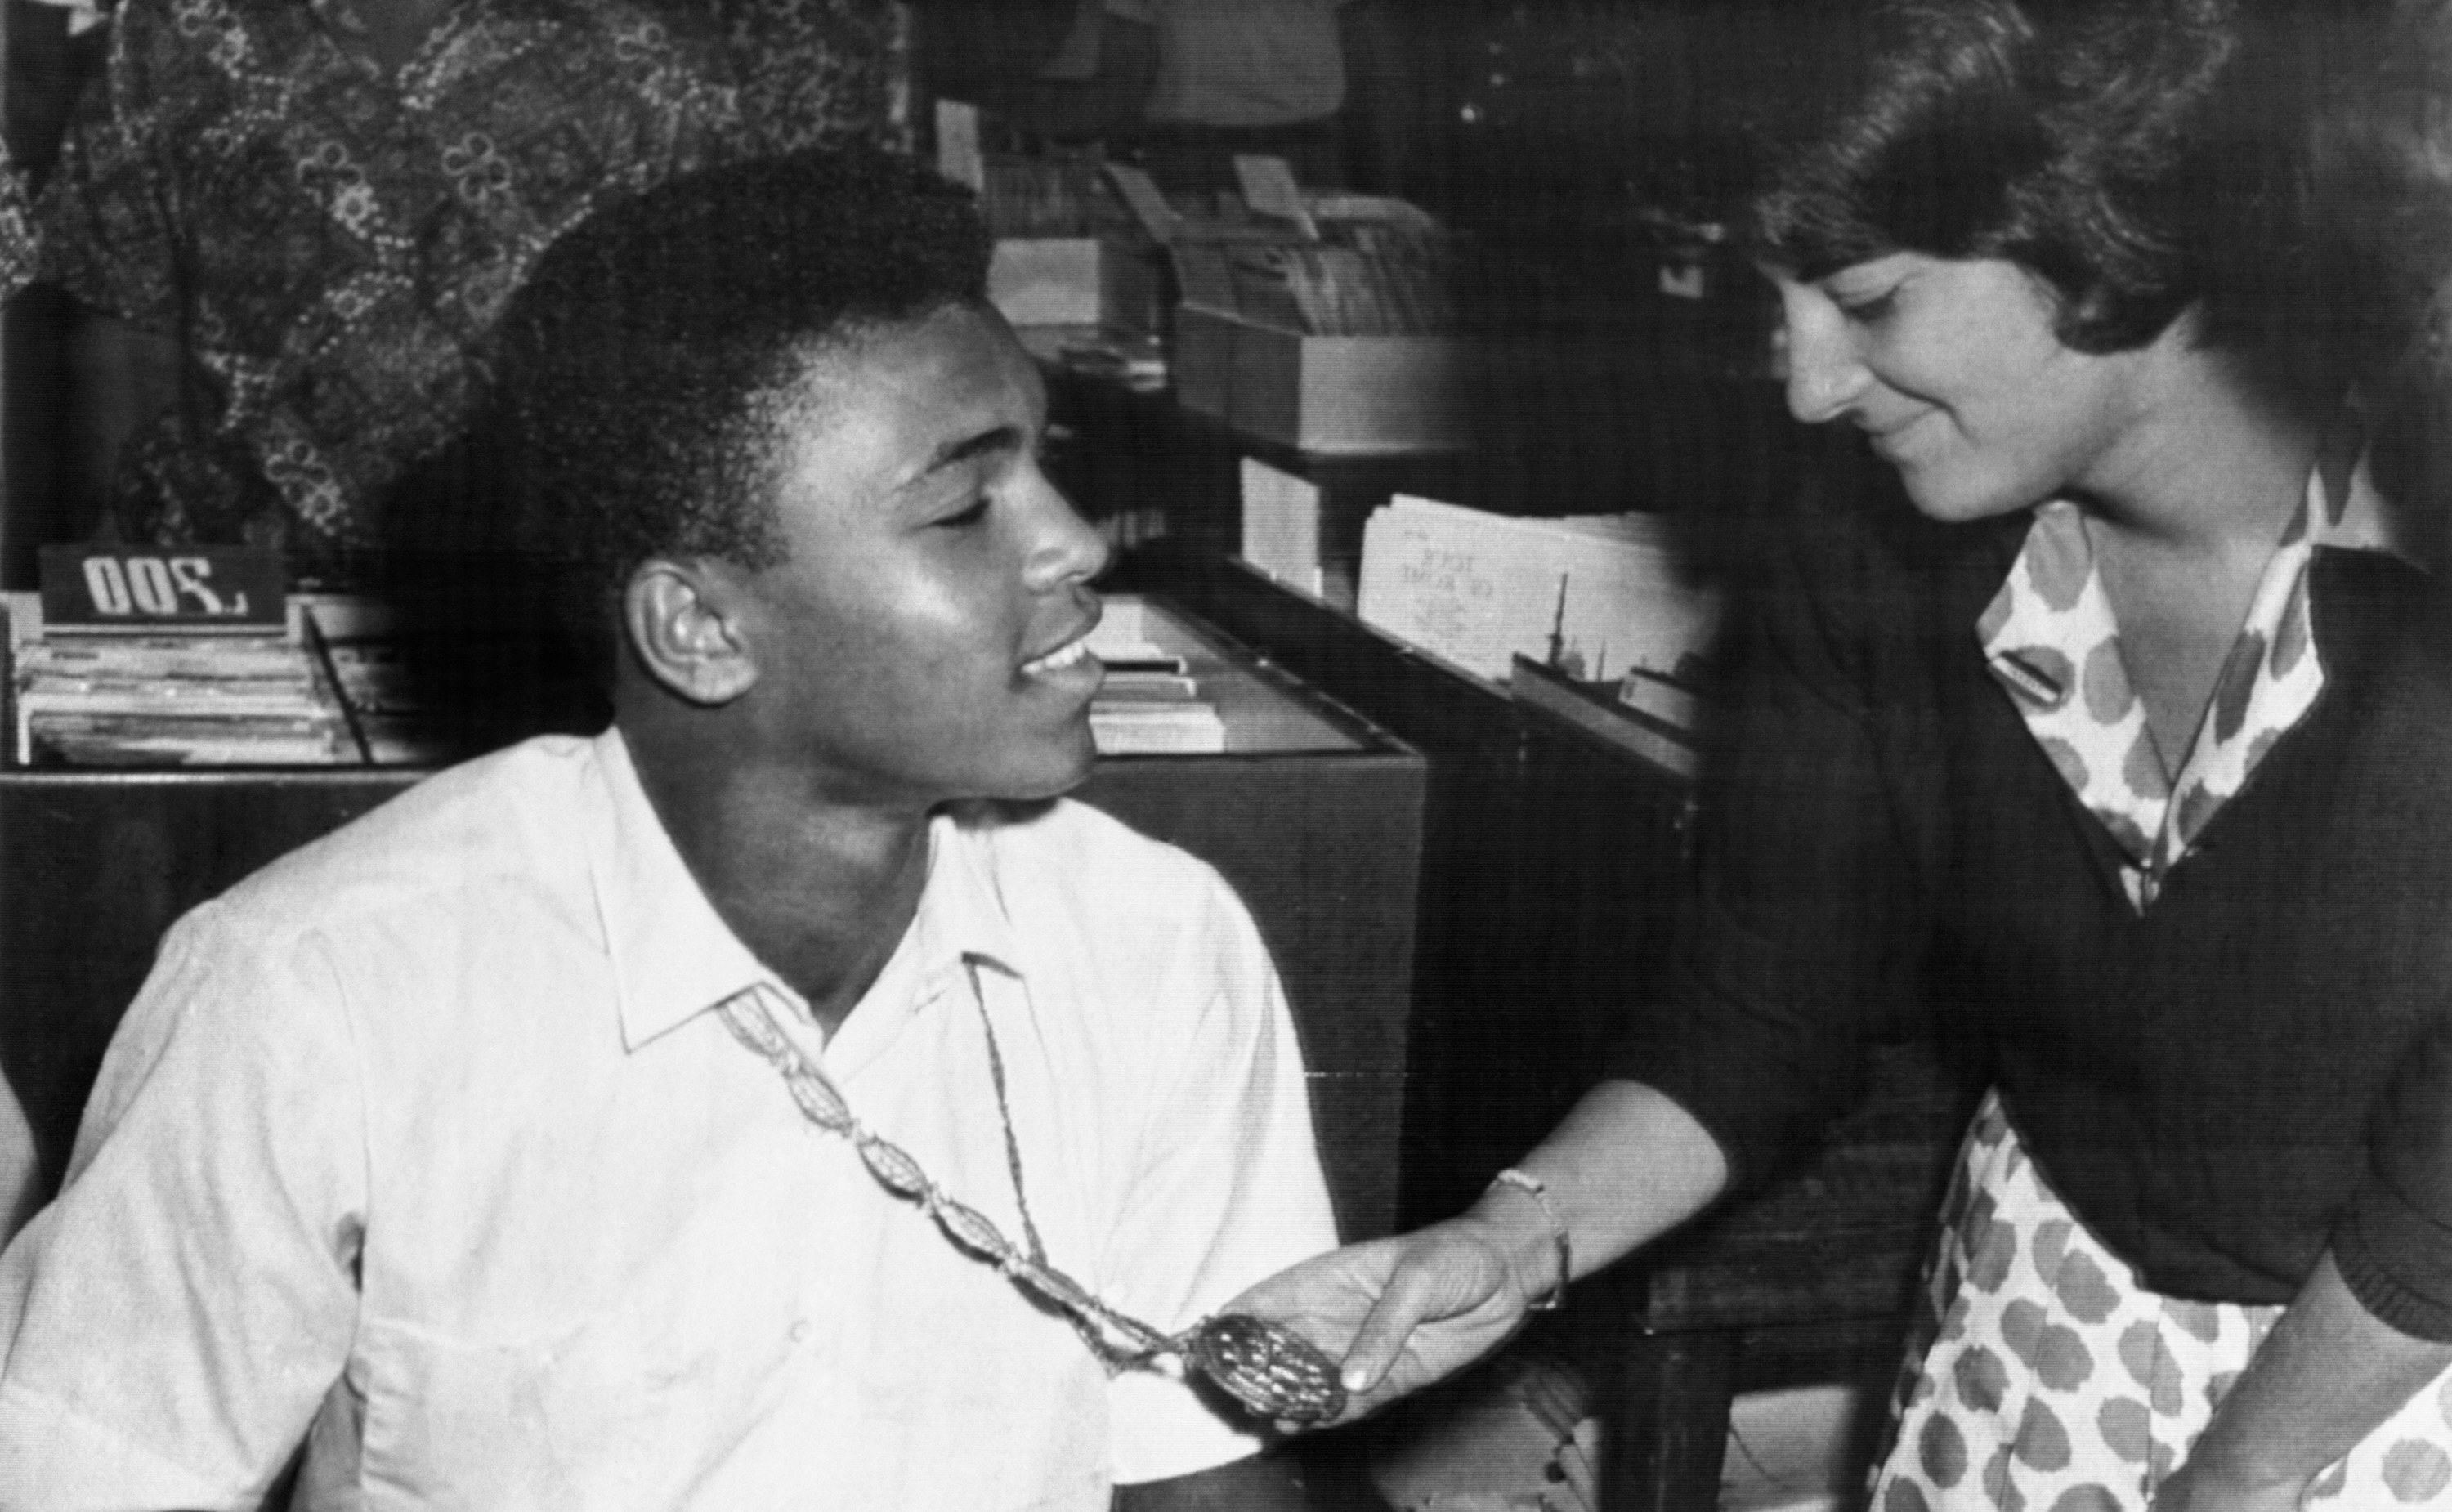 A woman examines the medal that Muhammad Ali is wearing around his neck